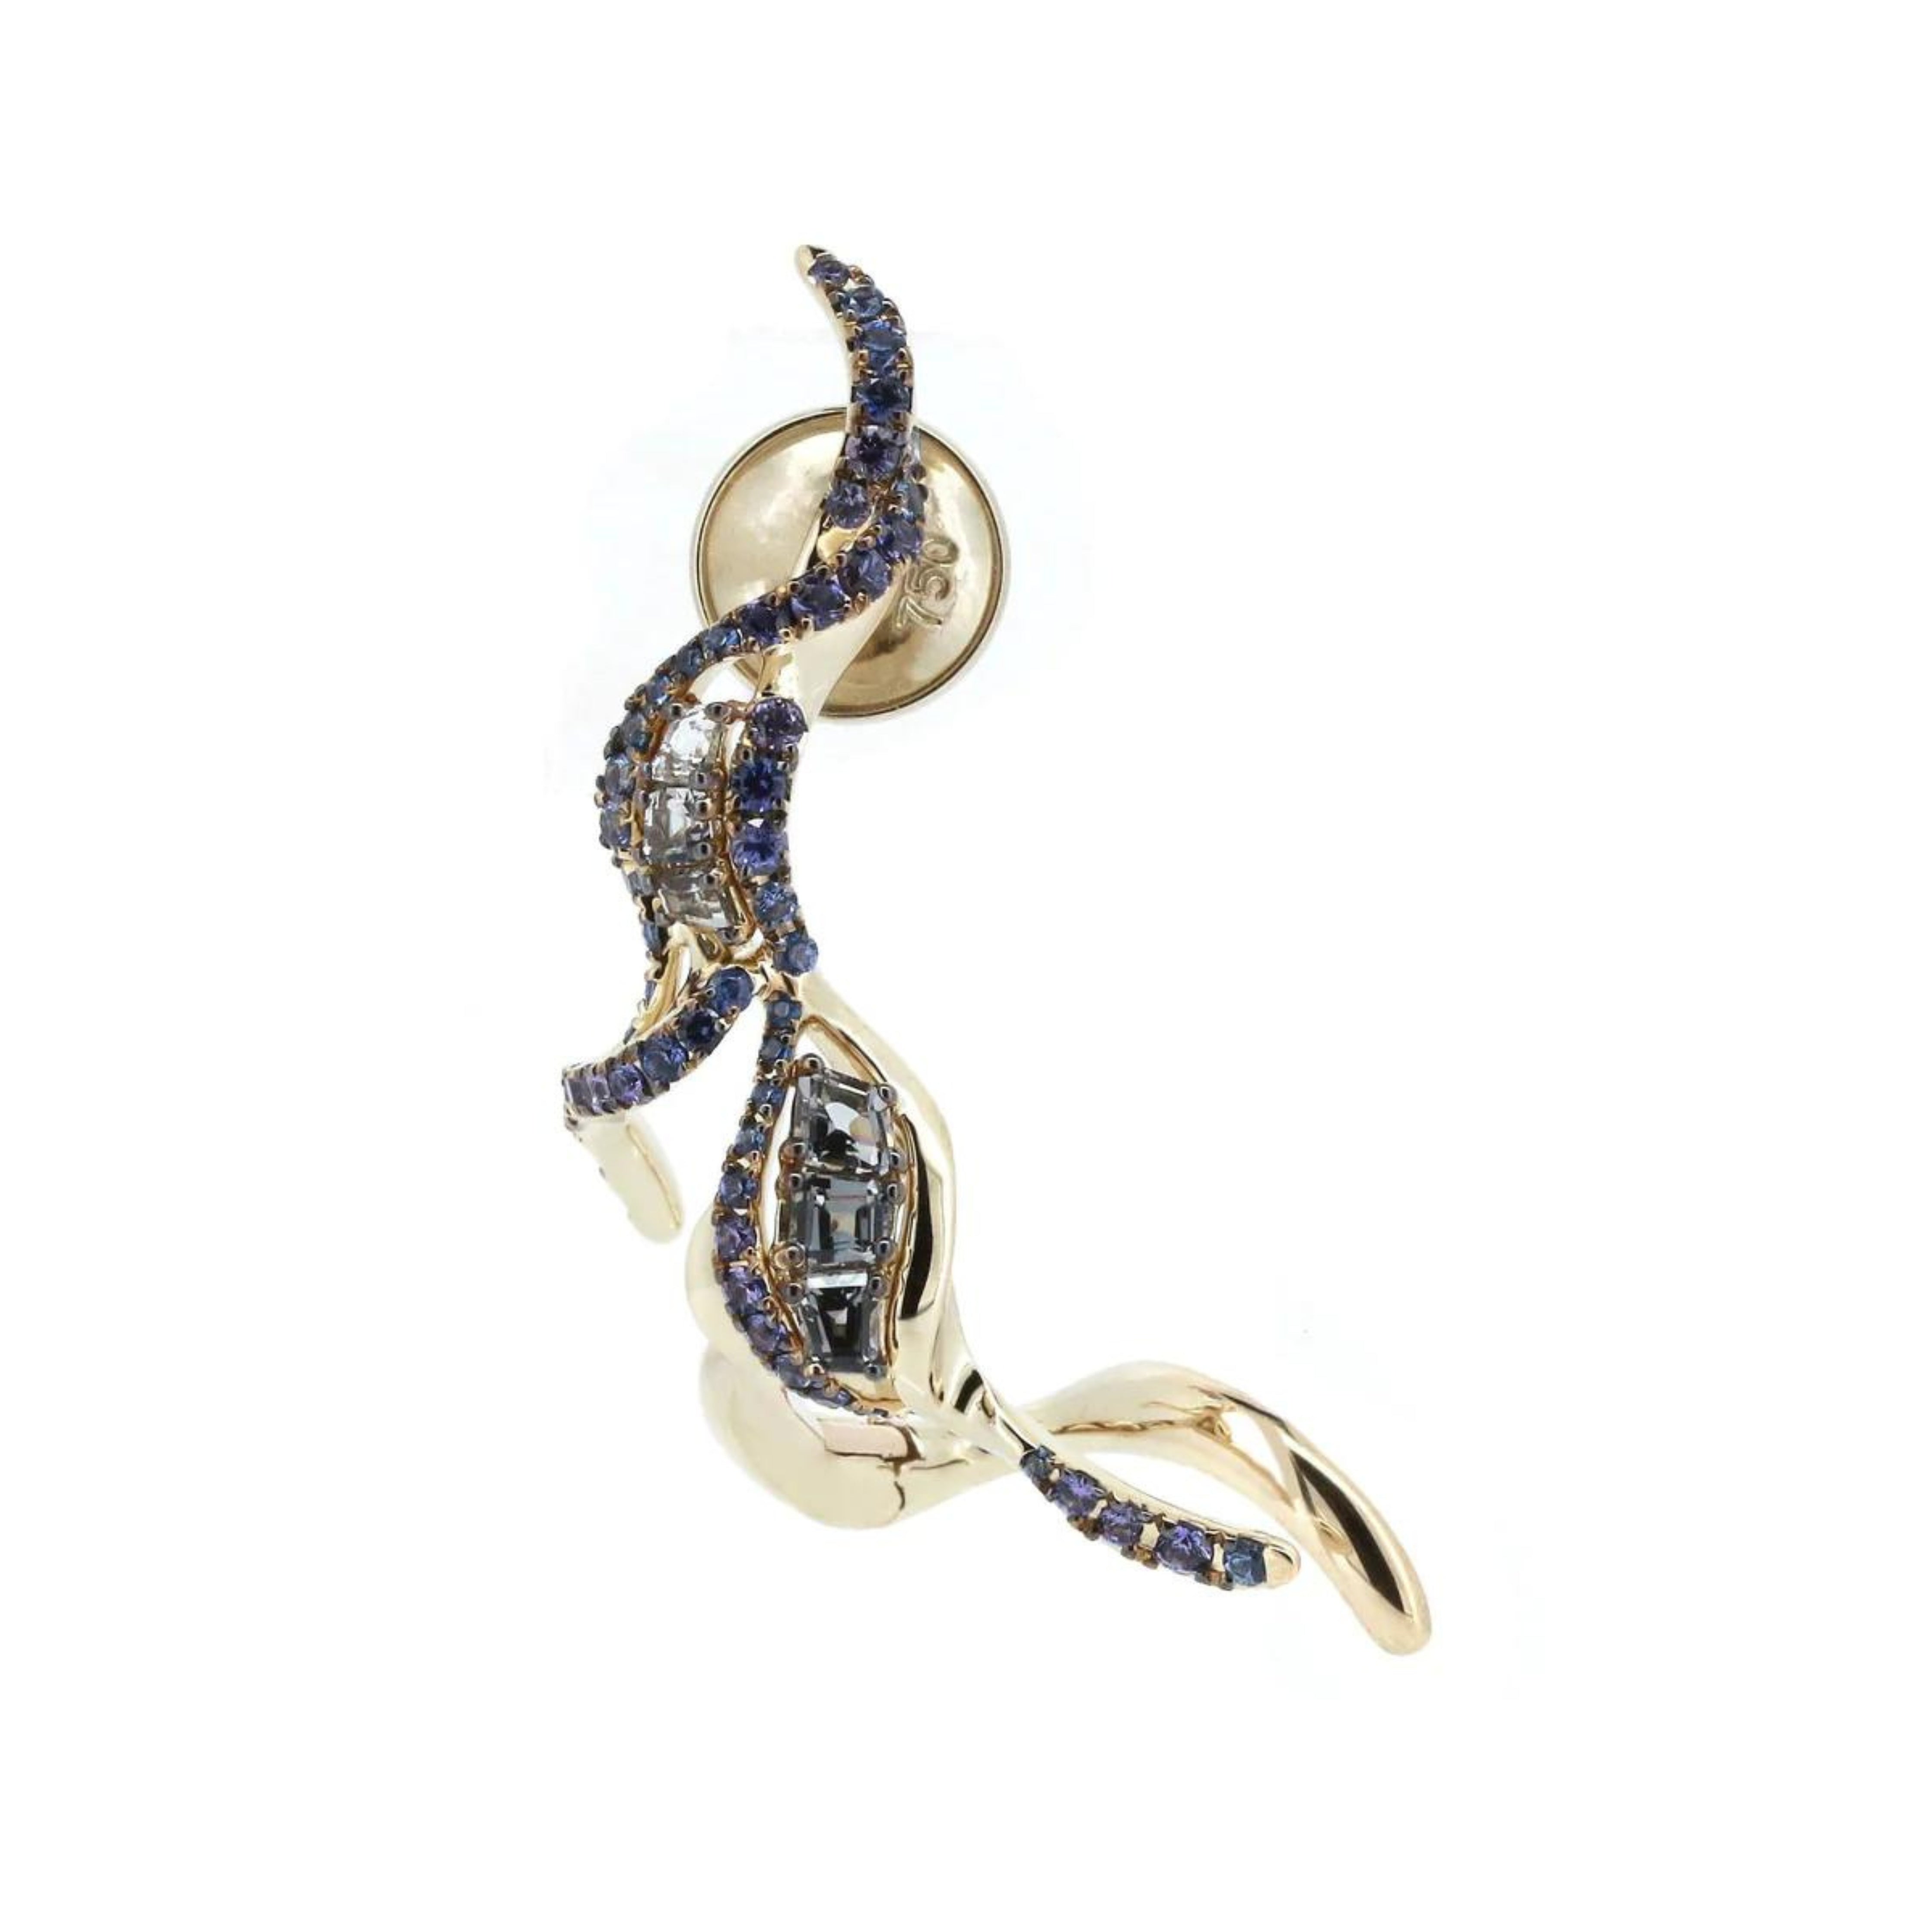 Bibi van der Velden Puff Ear Climber in Blue Sapphire. shades of blue and grey sapphires and spinels adorn the Puff Ear Climber&#39;s 18k white gold tendrils. Delicately crafted, this climber elegantly pierces the ear lobe and sweeps up the ear&#39;s outer edge. Product shown from the front view.